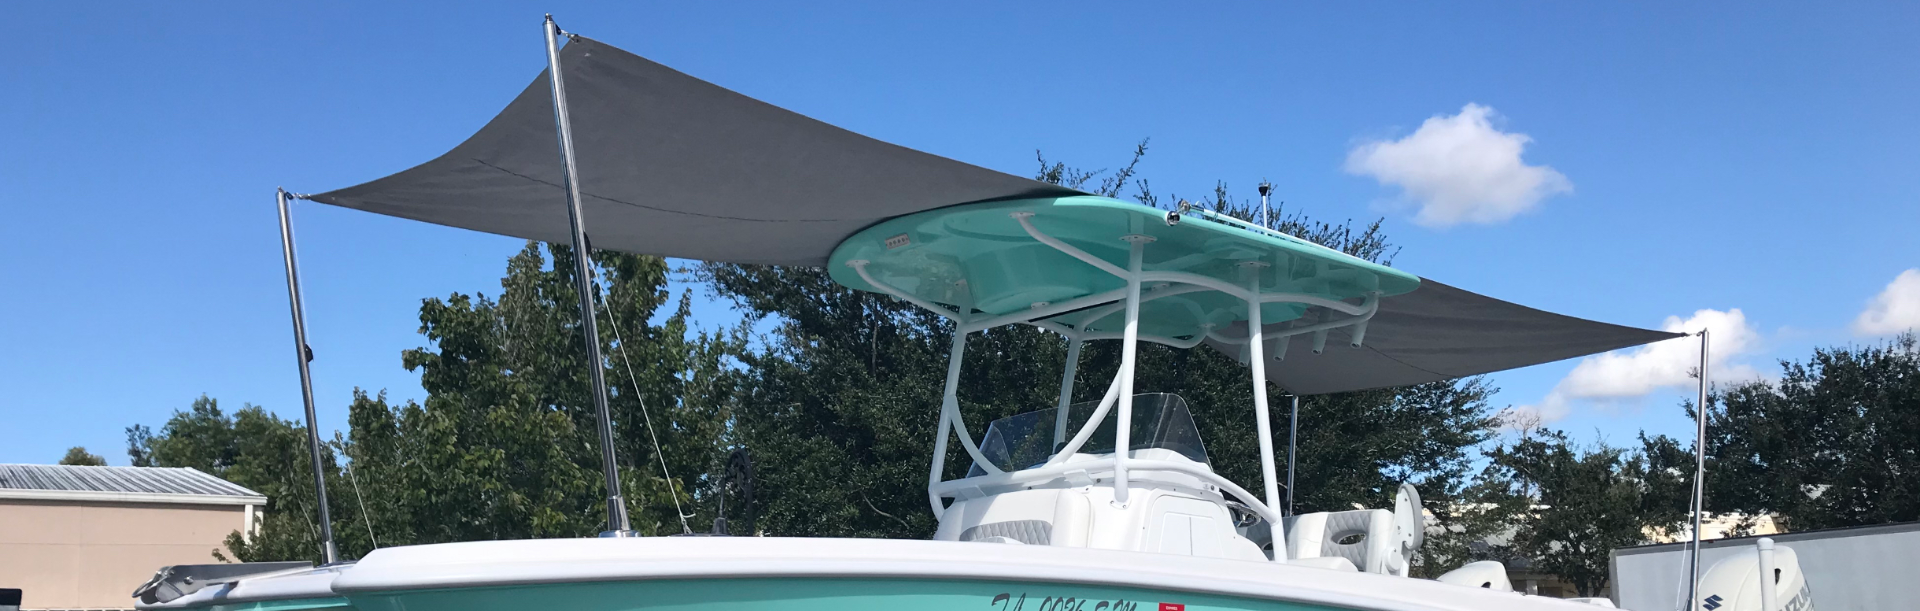 t top replacement canvas for bimini tops